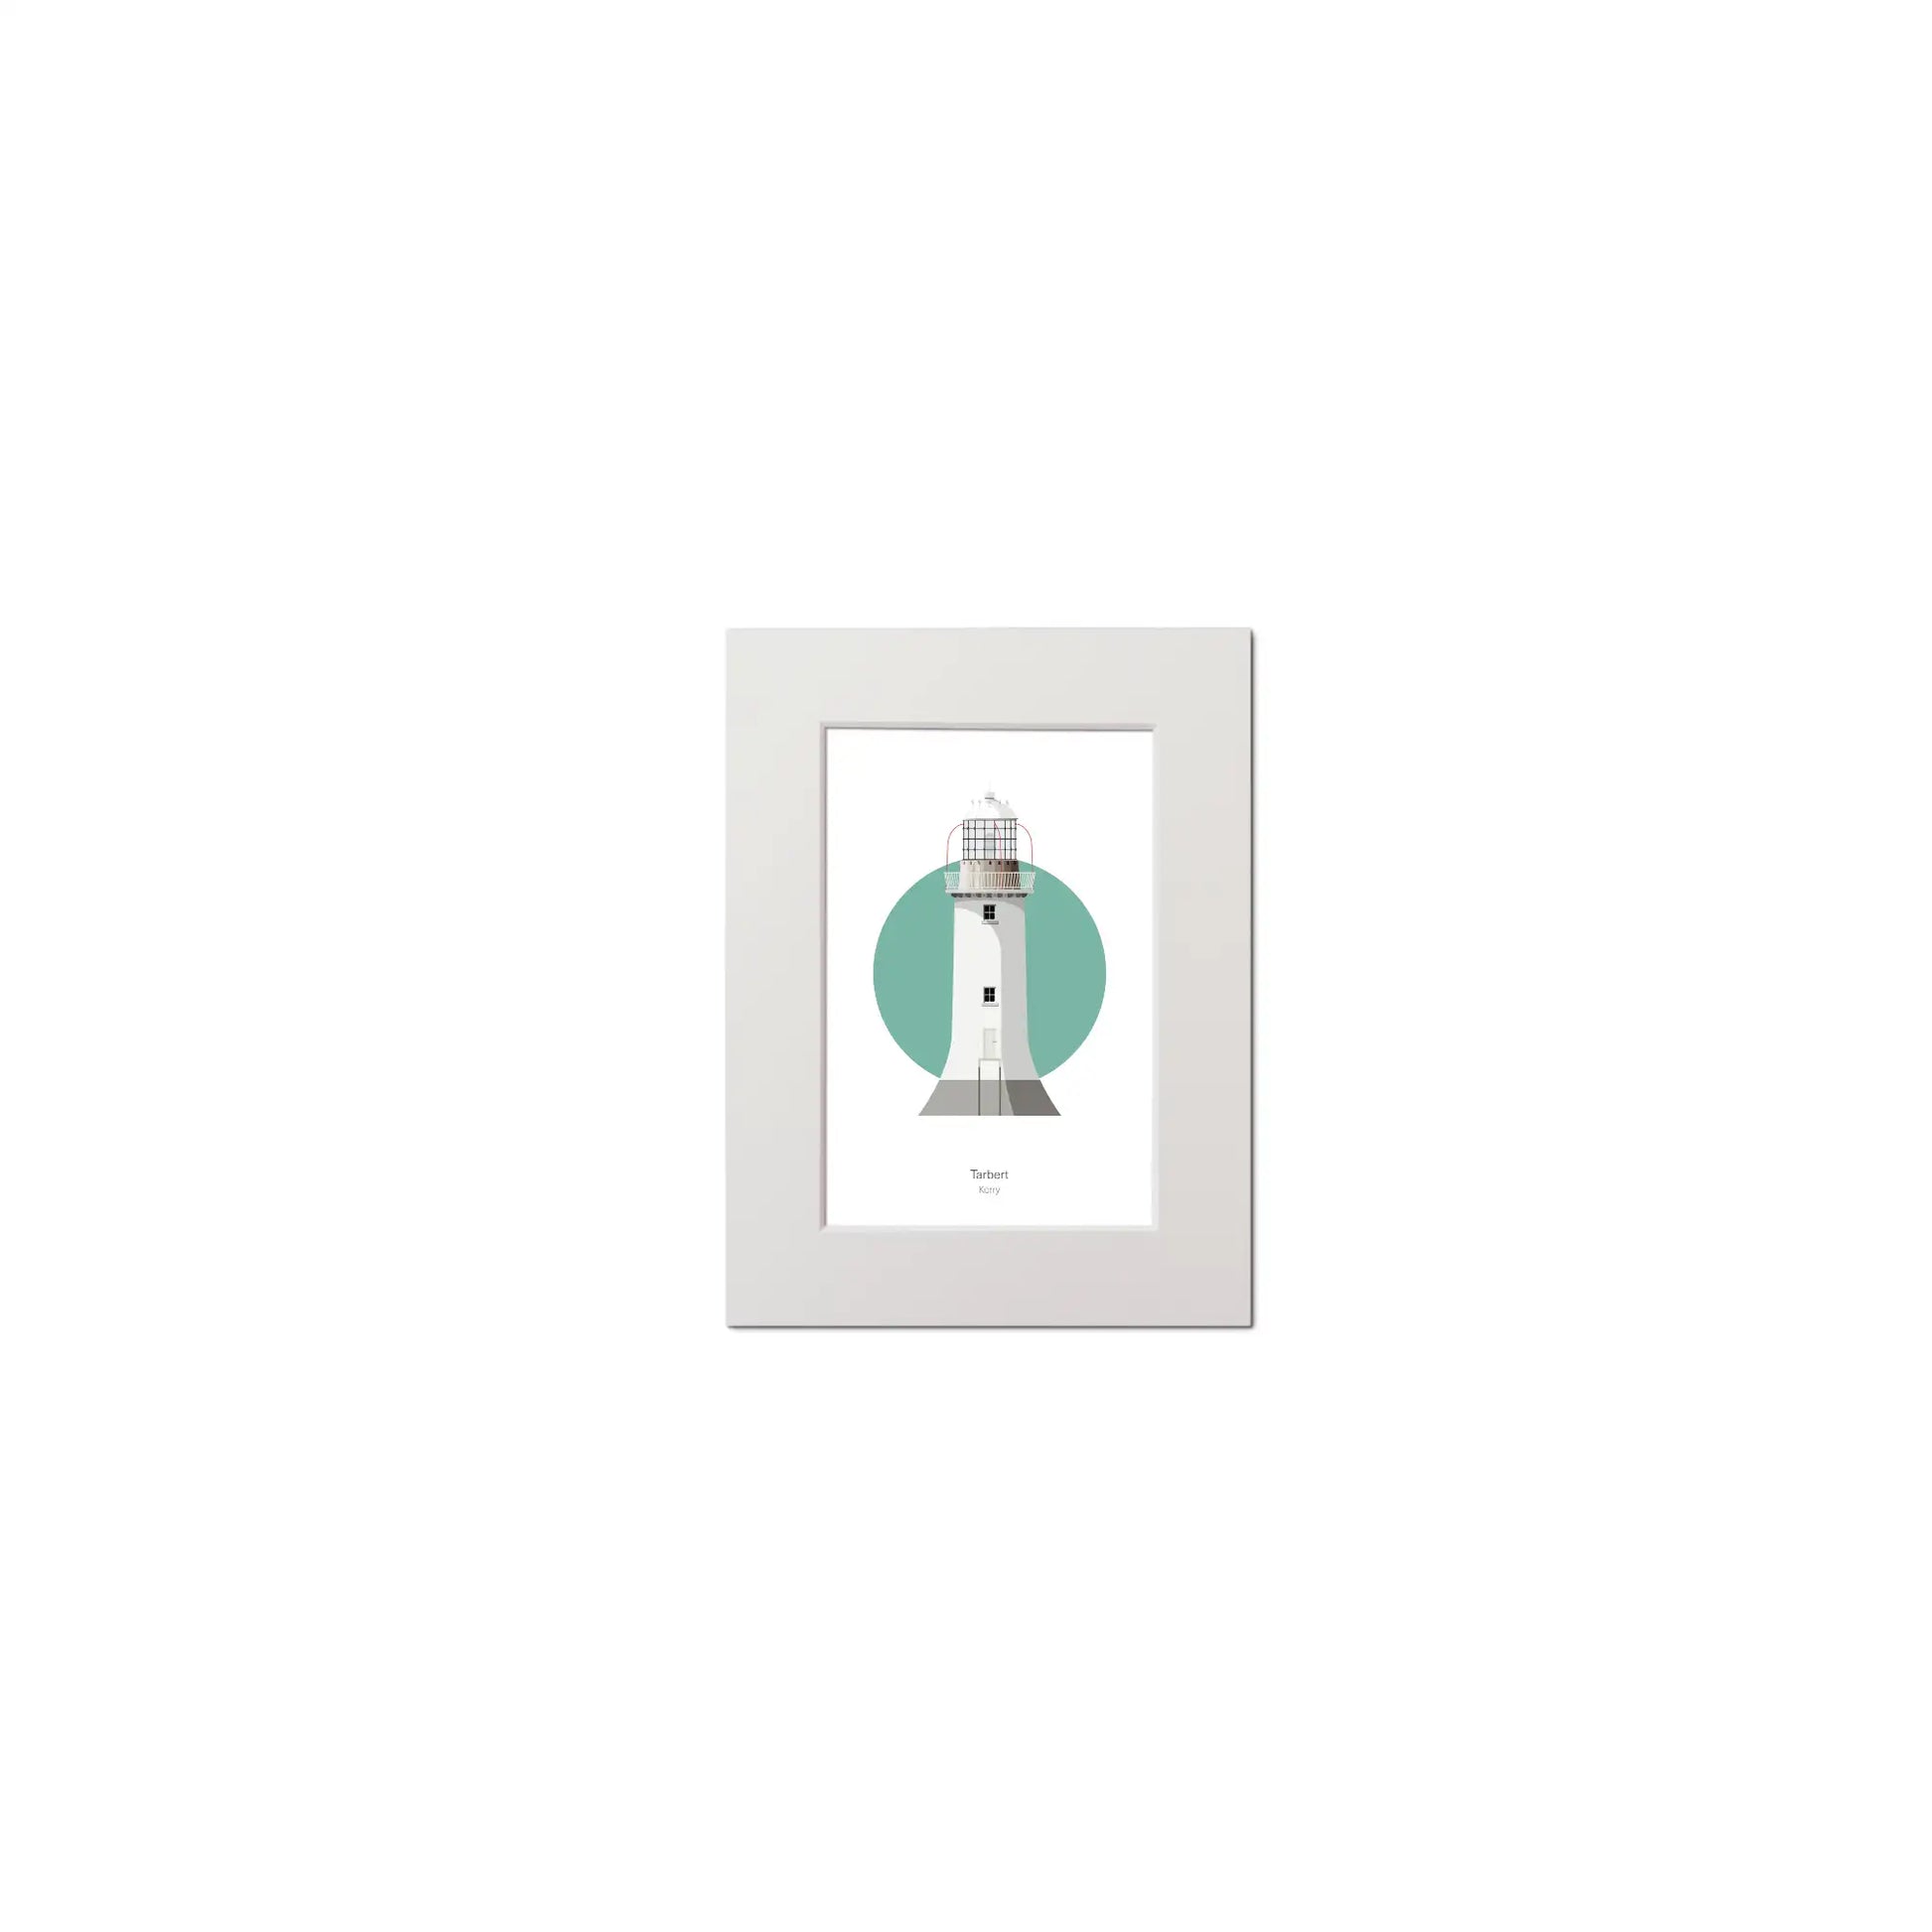 Contemporary graphic illustration of Tarbert lighthouse on a white background inside light blue square, mounted and measuring 15x20cm.